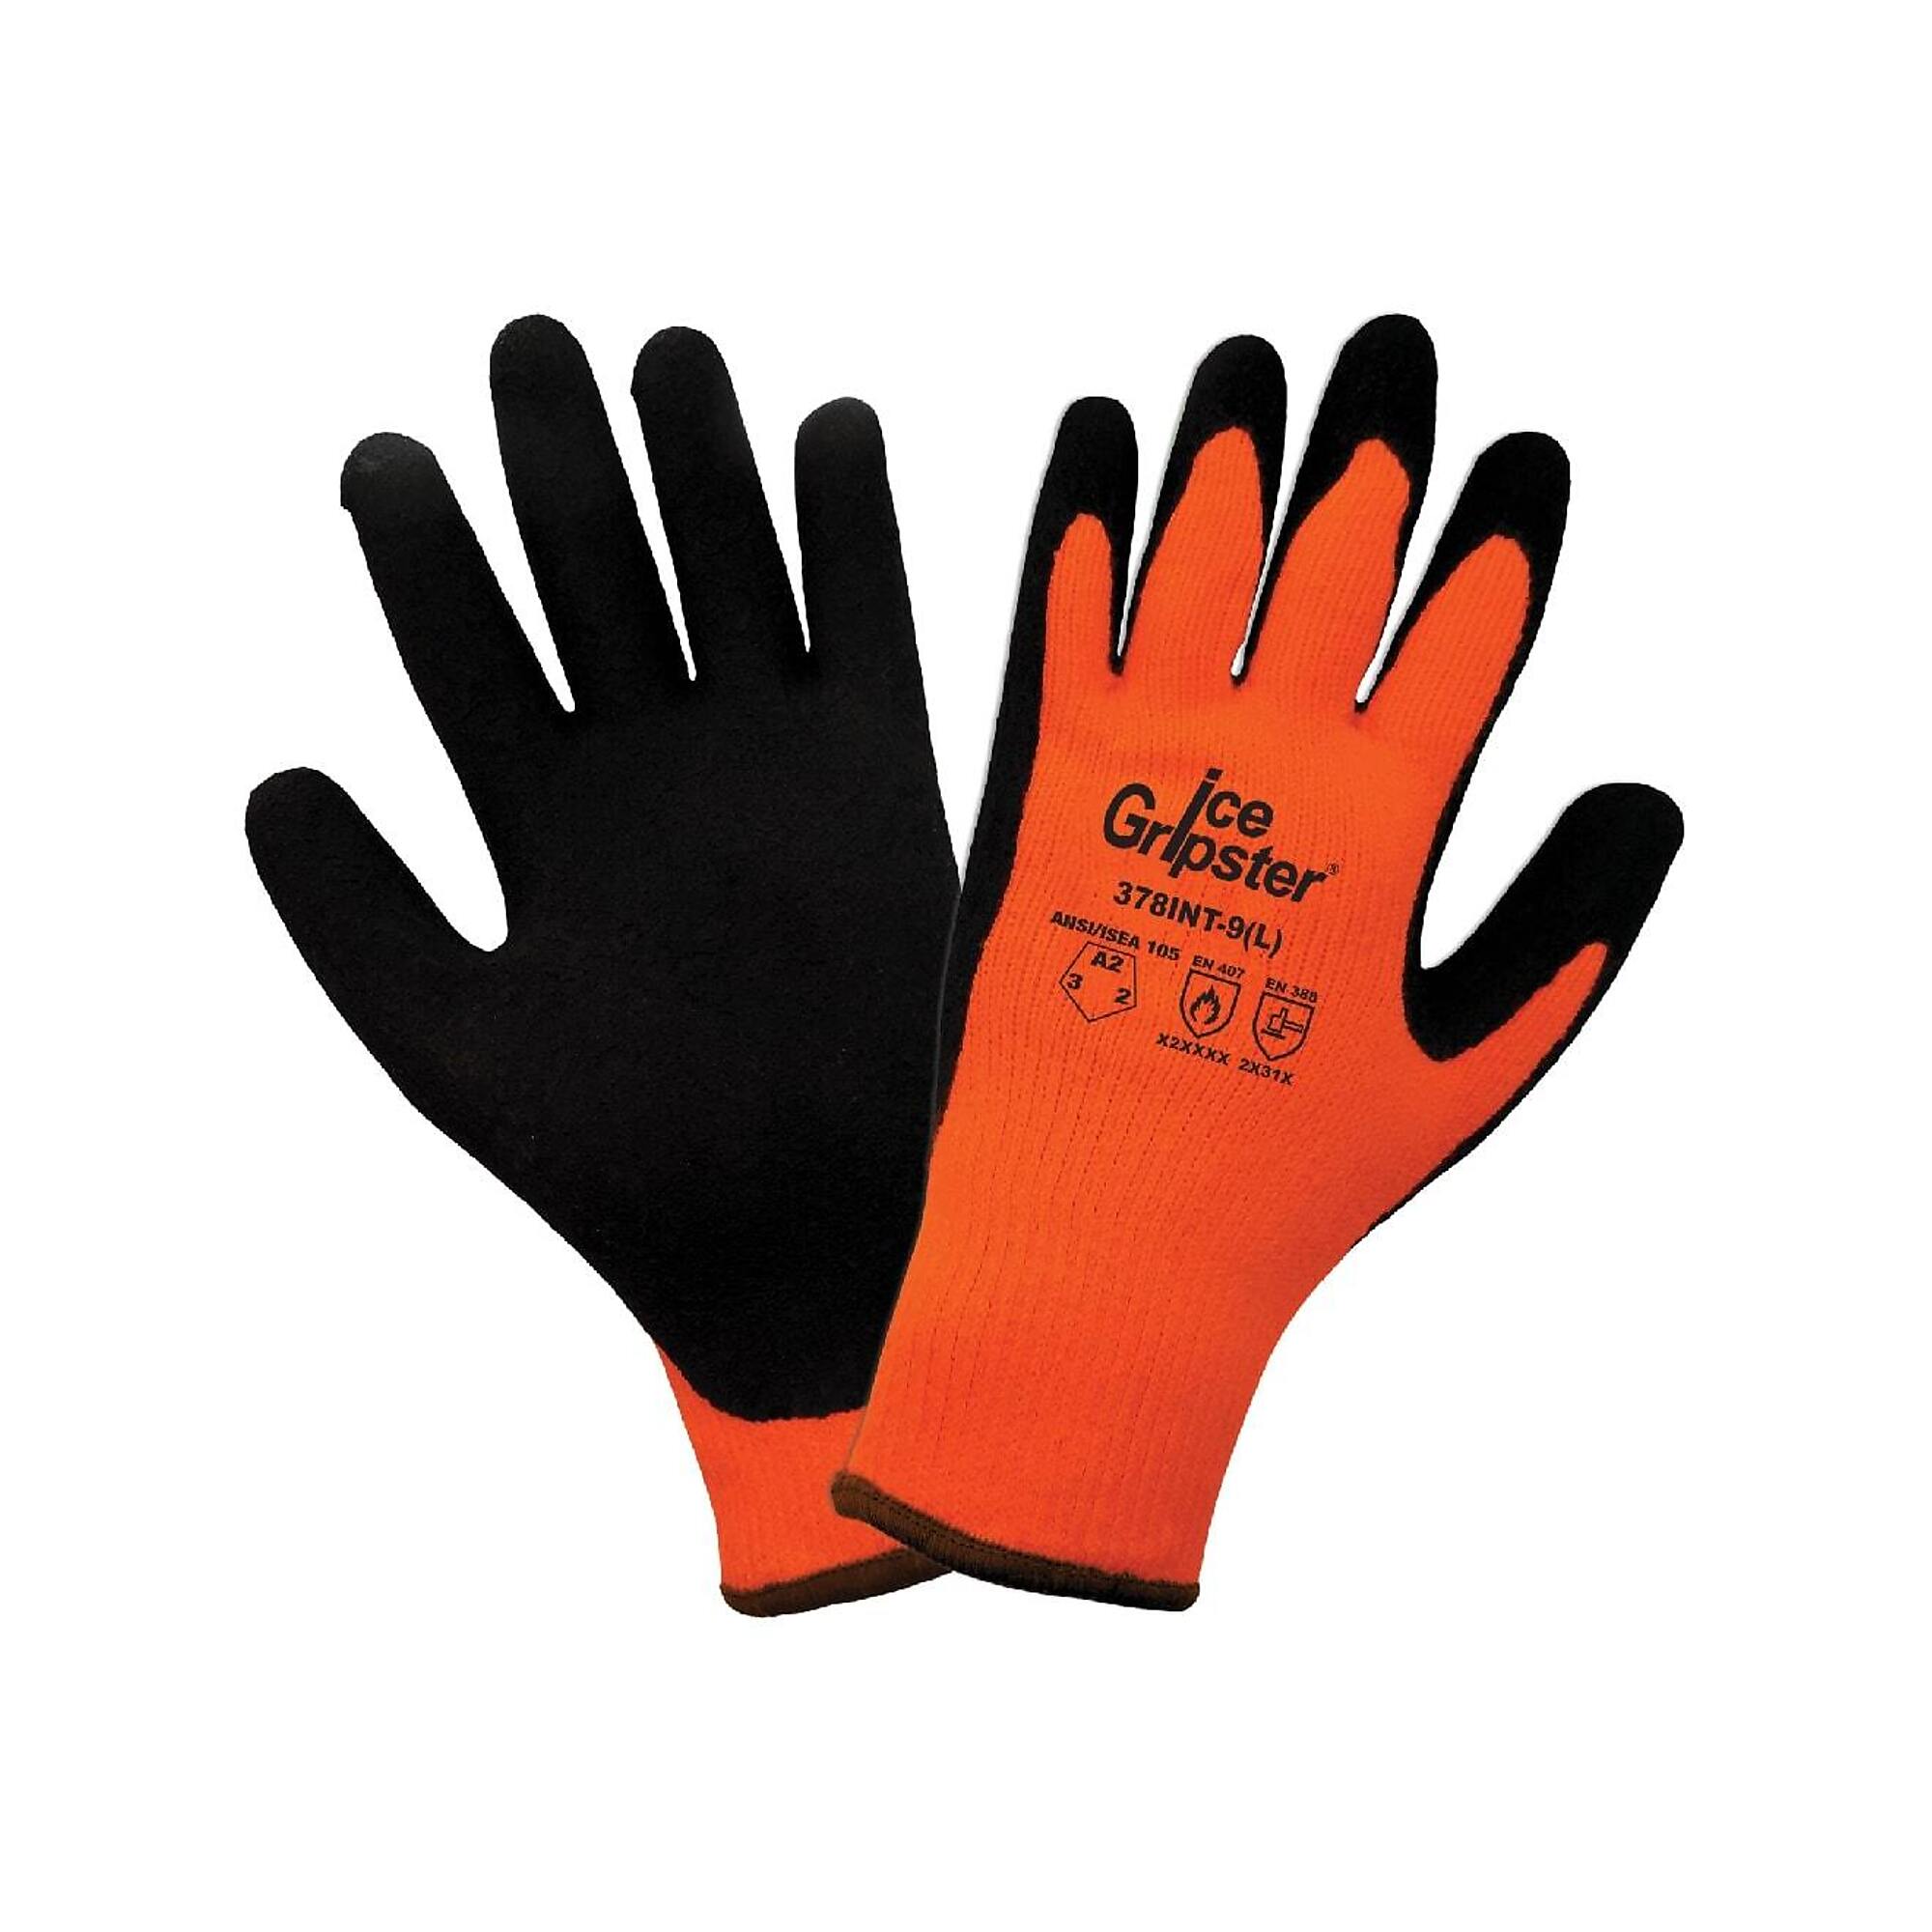 Global Glove Ice Gripster , HV Org Insulated, Rub Coat, Cut Resist A2 Gloves -12 Pairs, Size M, Color Orange/Black, Included (qty.) 12 Model 378INT-(M